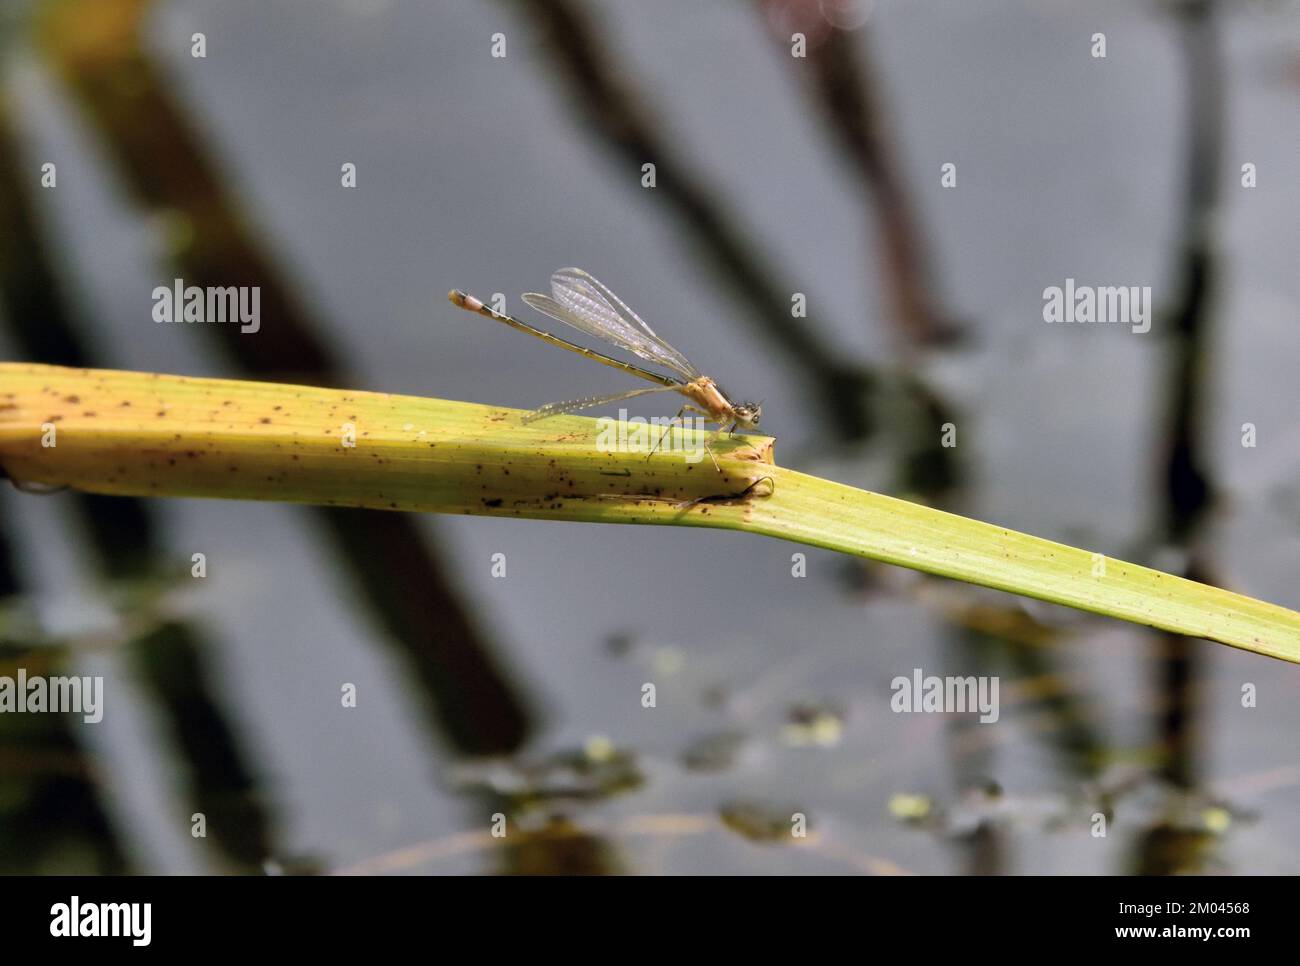 A newly emerged Common Blue Damselfly (Enallagma cyathigerum) resting on the stem of an aquatic plant growing in a pond in Southern England Stock Photo